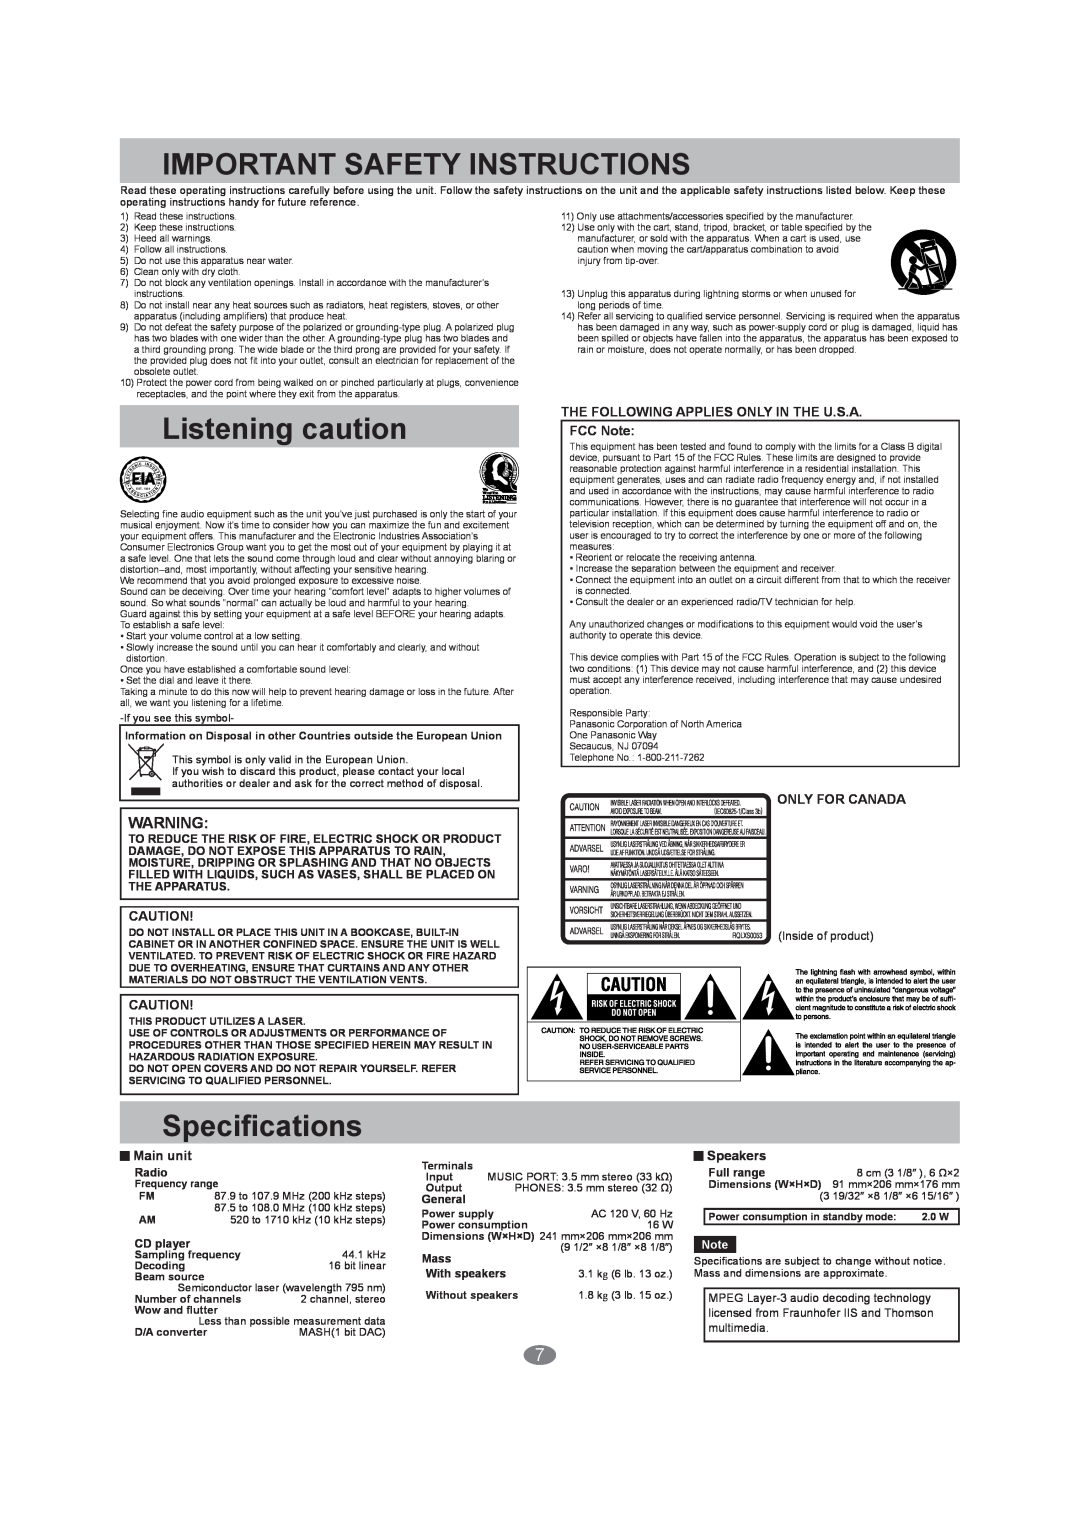 Panasonic SC-EN26 Important Safety Instructions, Listening caution, Speciﬁcations, Only For Canada, Main unit, Speakers 